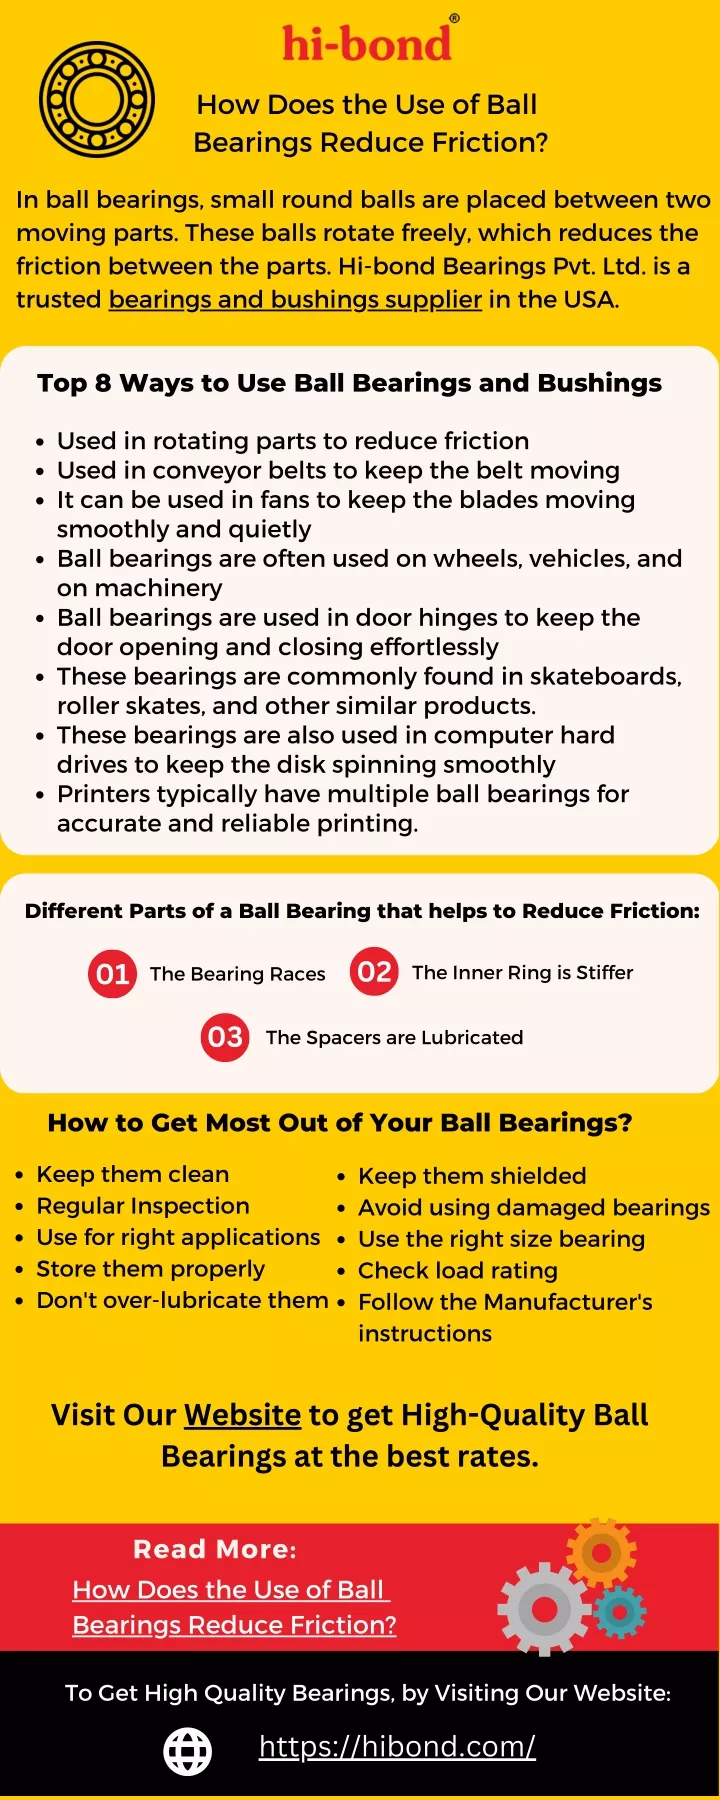 how does the use of ball bearings reduce friction